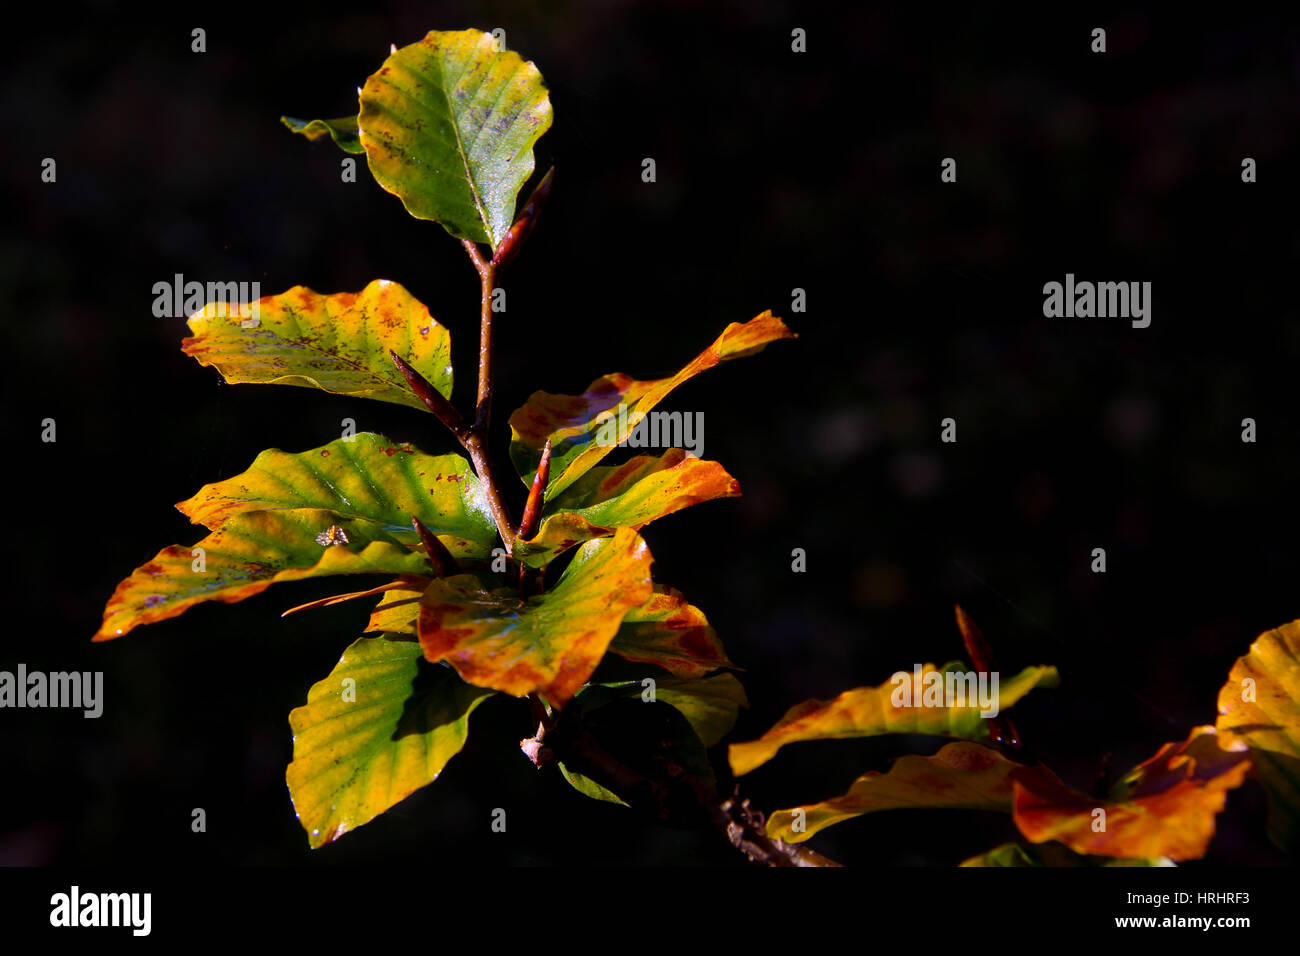 Close-up of fall-colored leaves with a black background Stock Photo